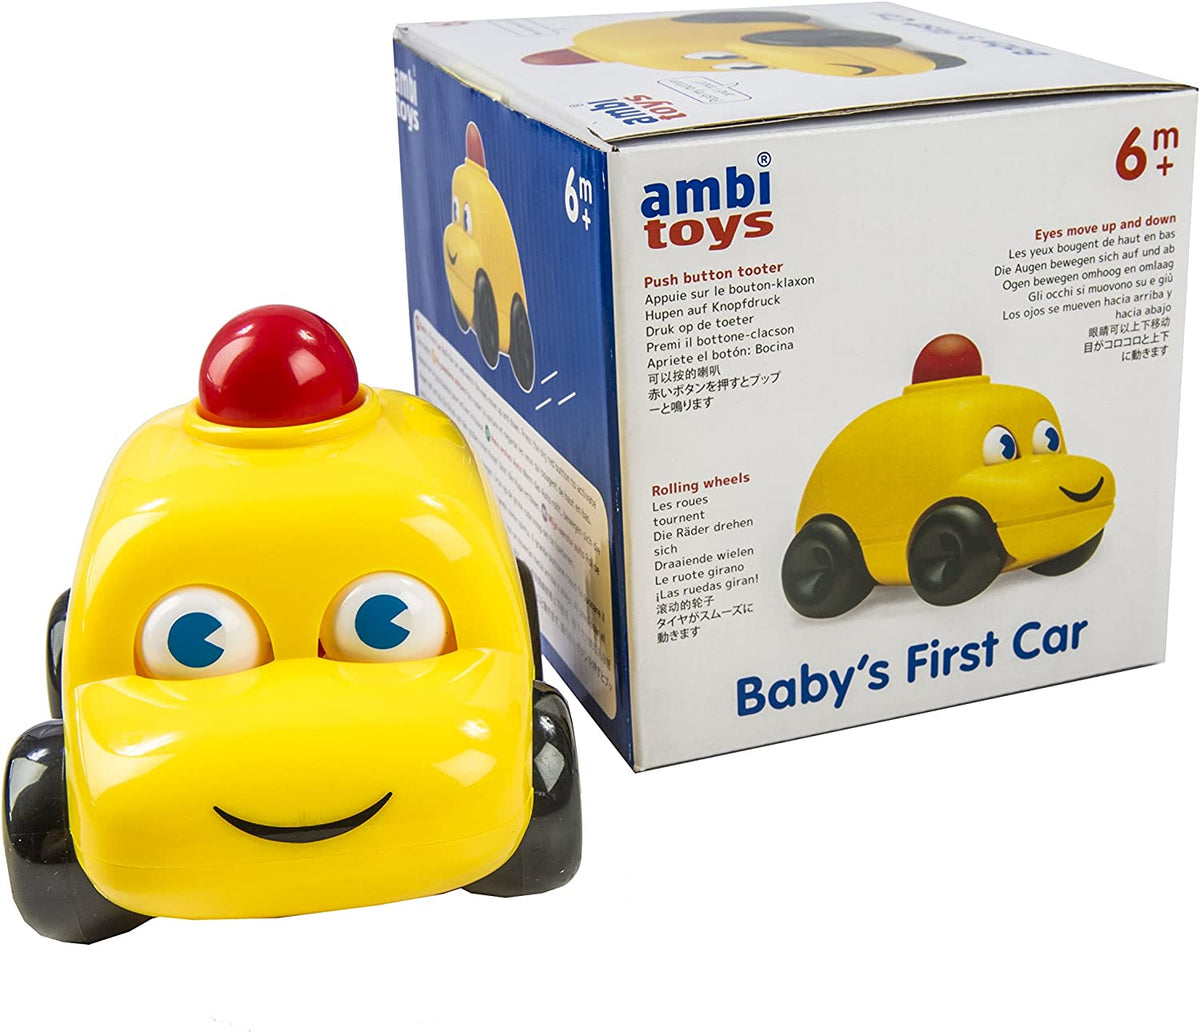 Baby’s First Car